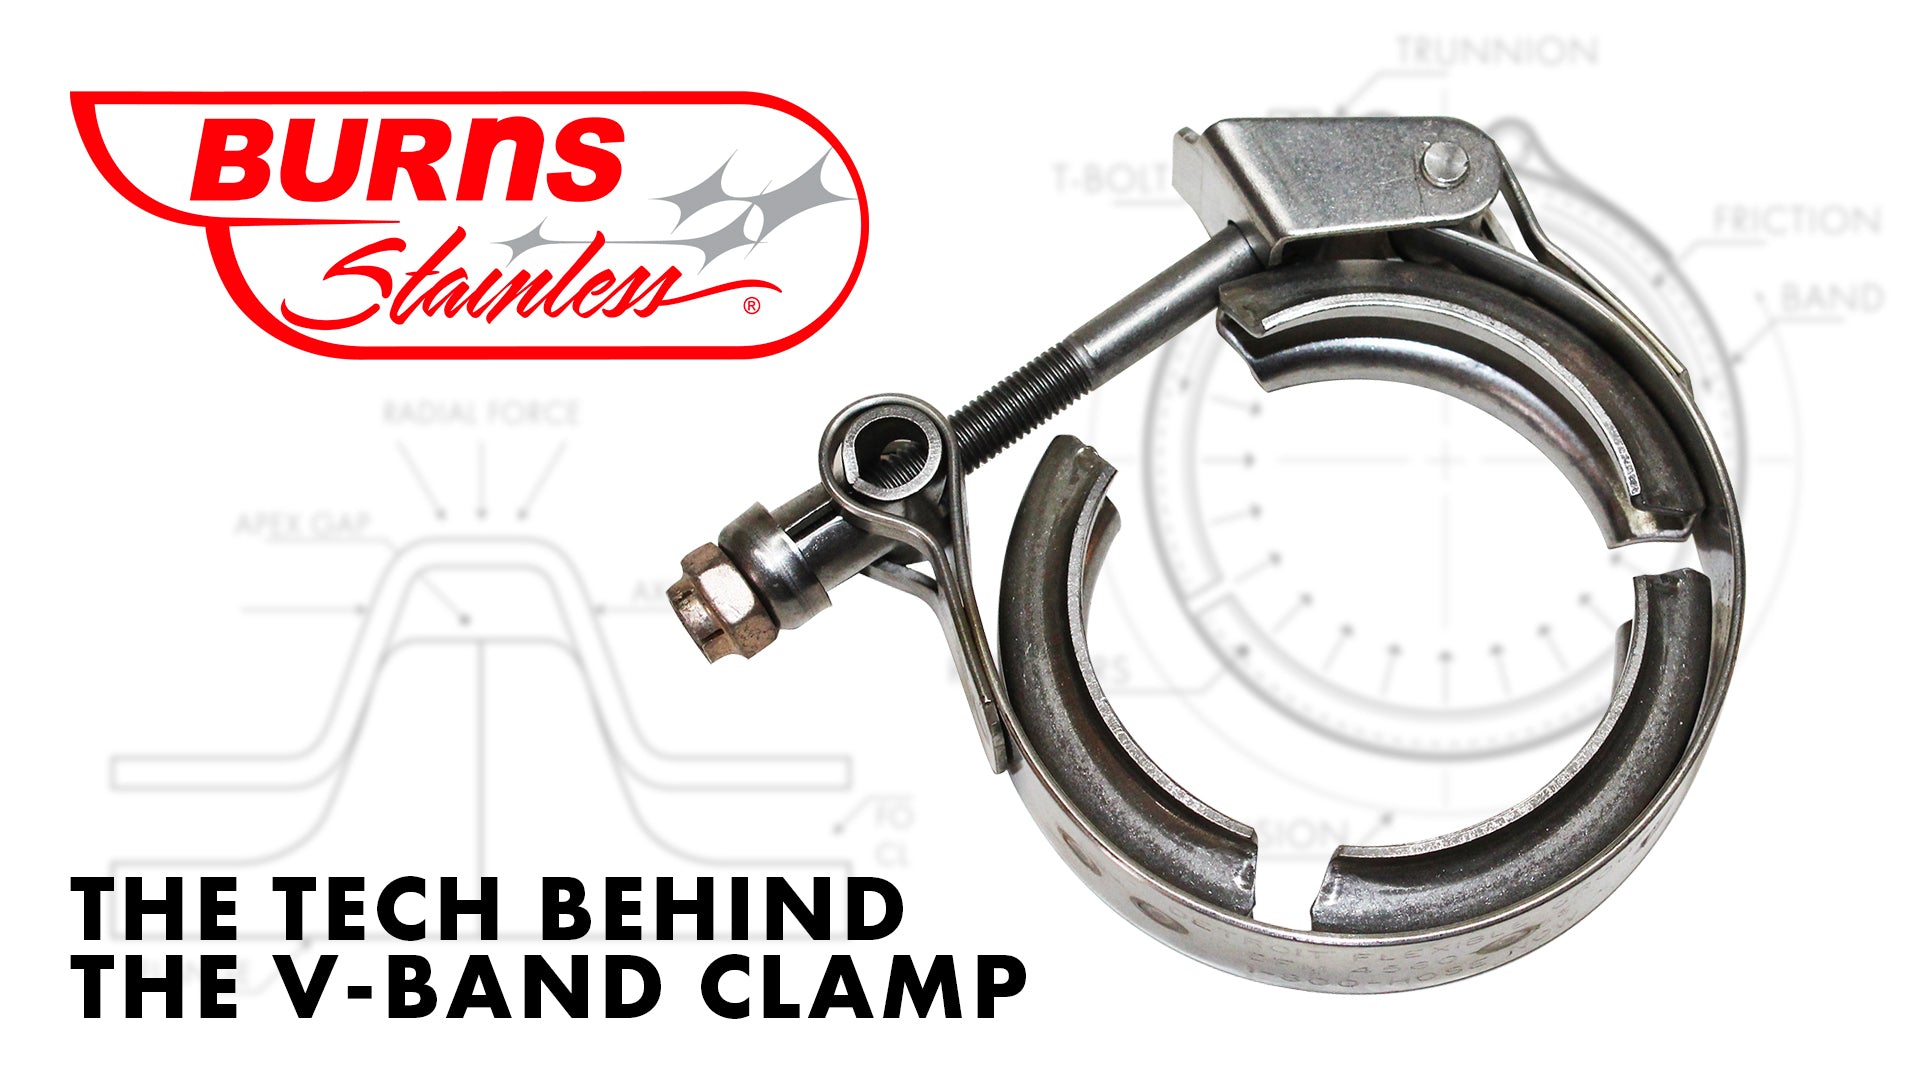 The Tech Behind the V-Band Clamp